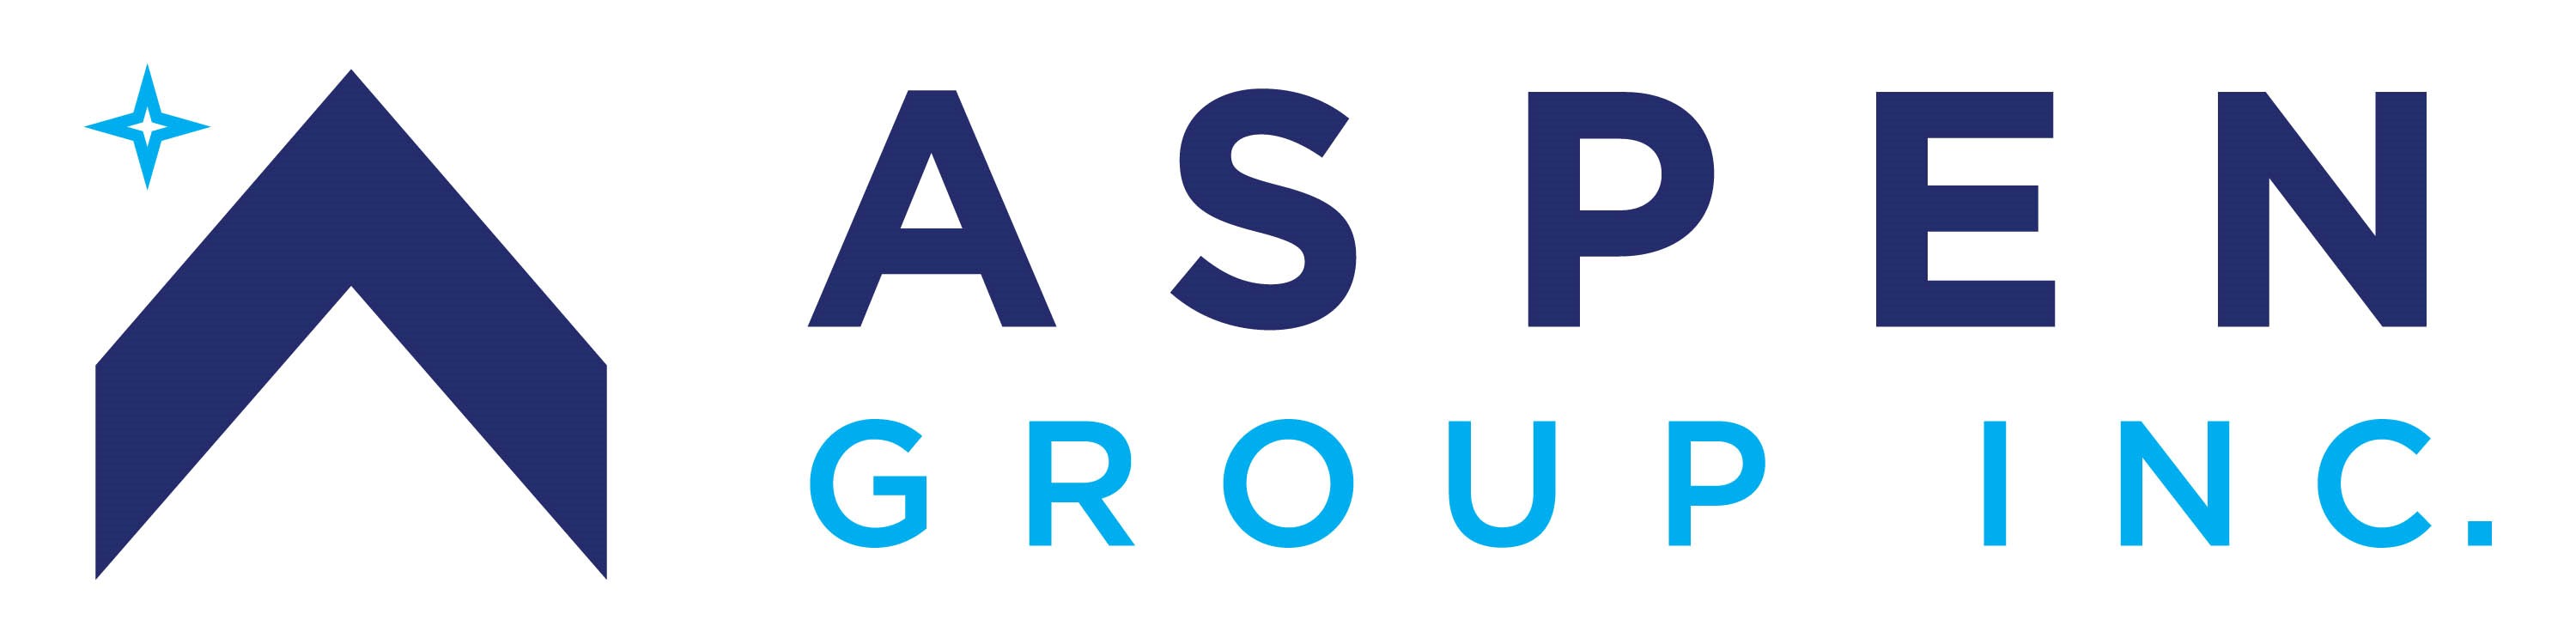 Aspen University Executes Amendment to September 2022 Consent Agreement with the Arizona Board of Nursing that Permits the Teach-Out of its BSN Pre-Licensure Program to Continue